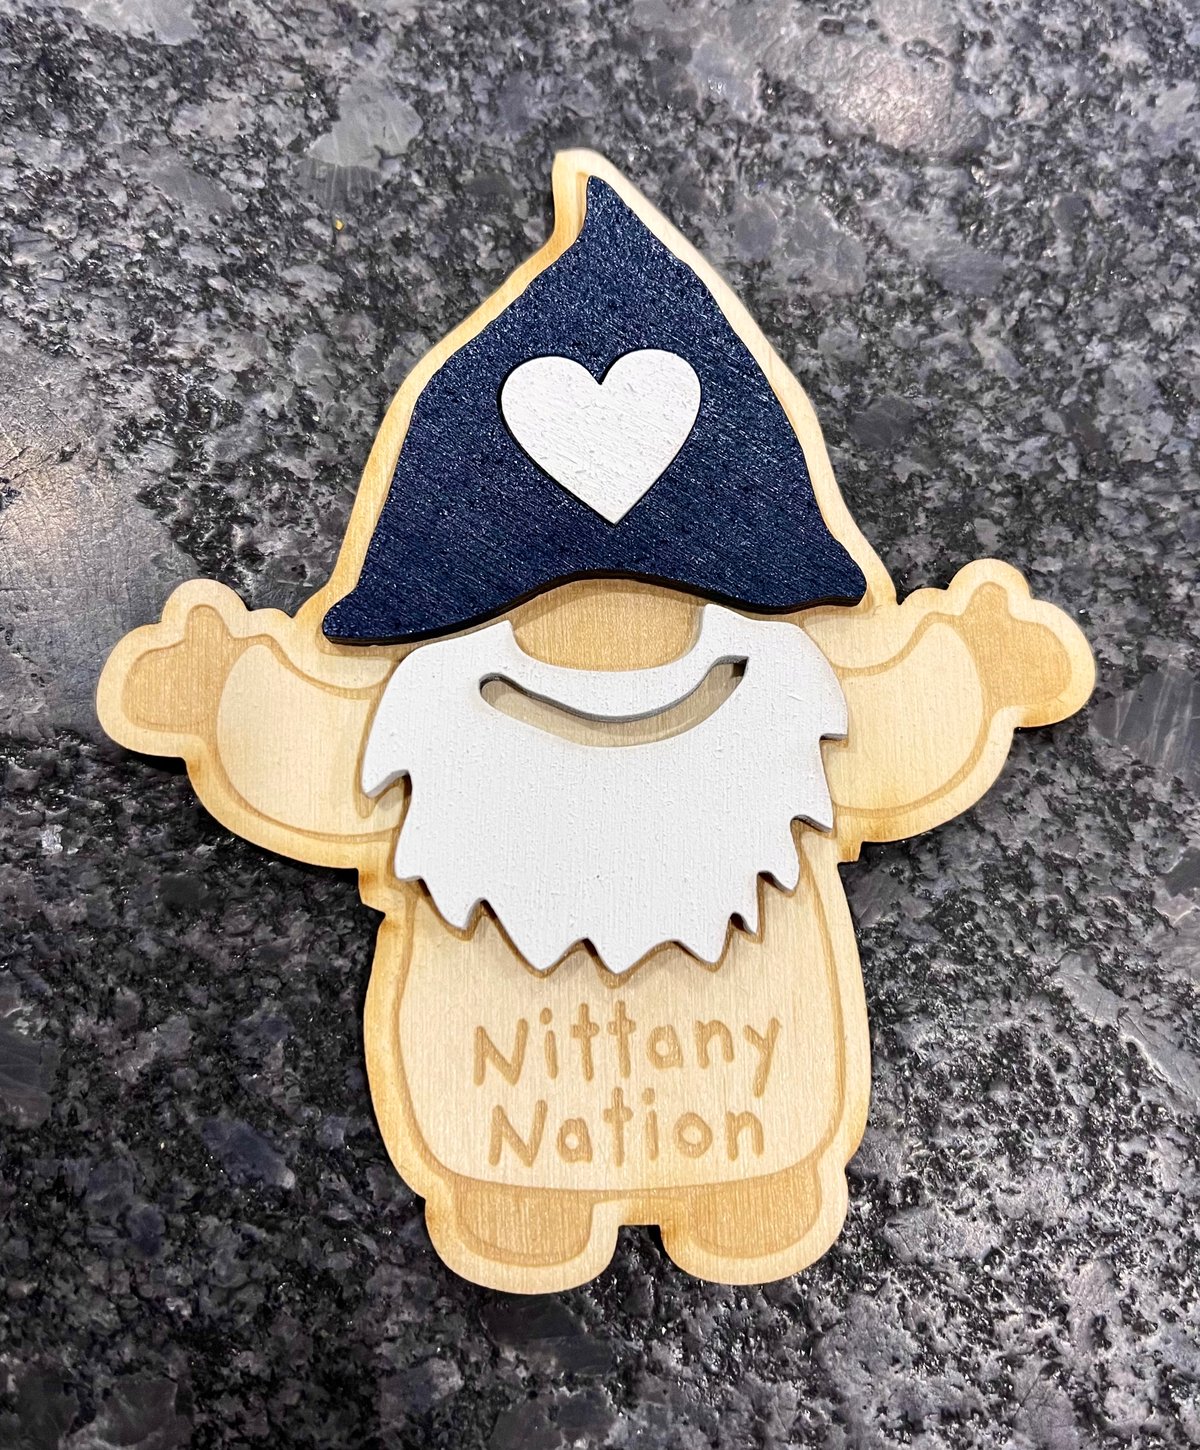 Image of Nittany Nation Gnome Magnet